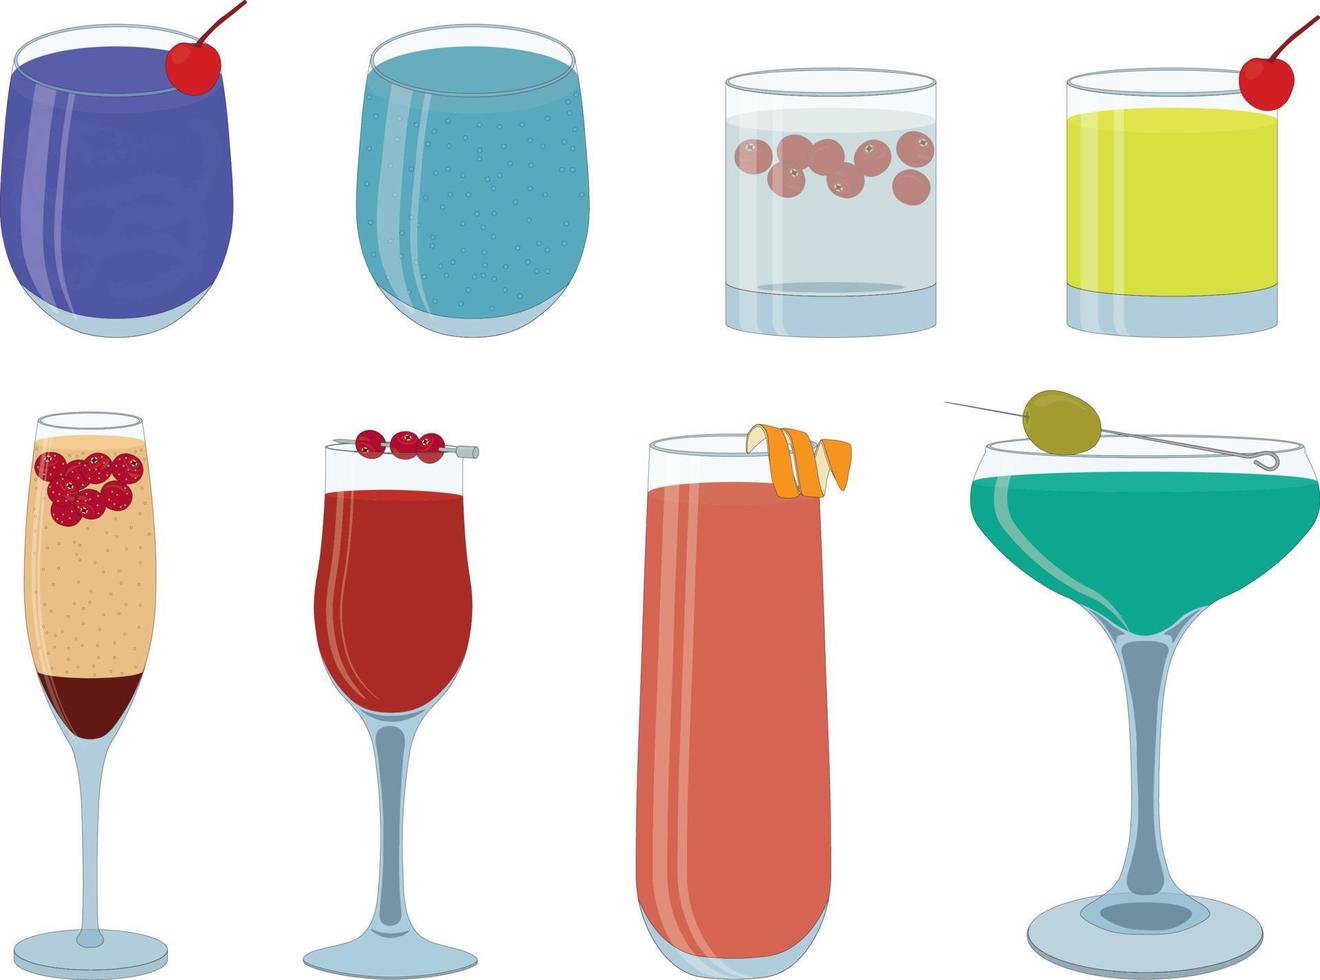 Alcohol cocktails collection in various glasses vector illustration